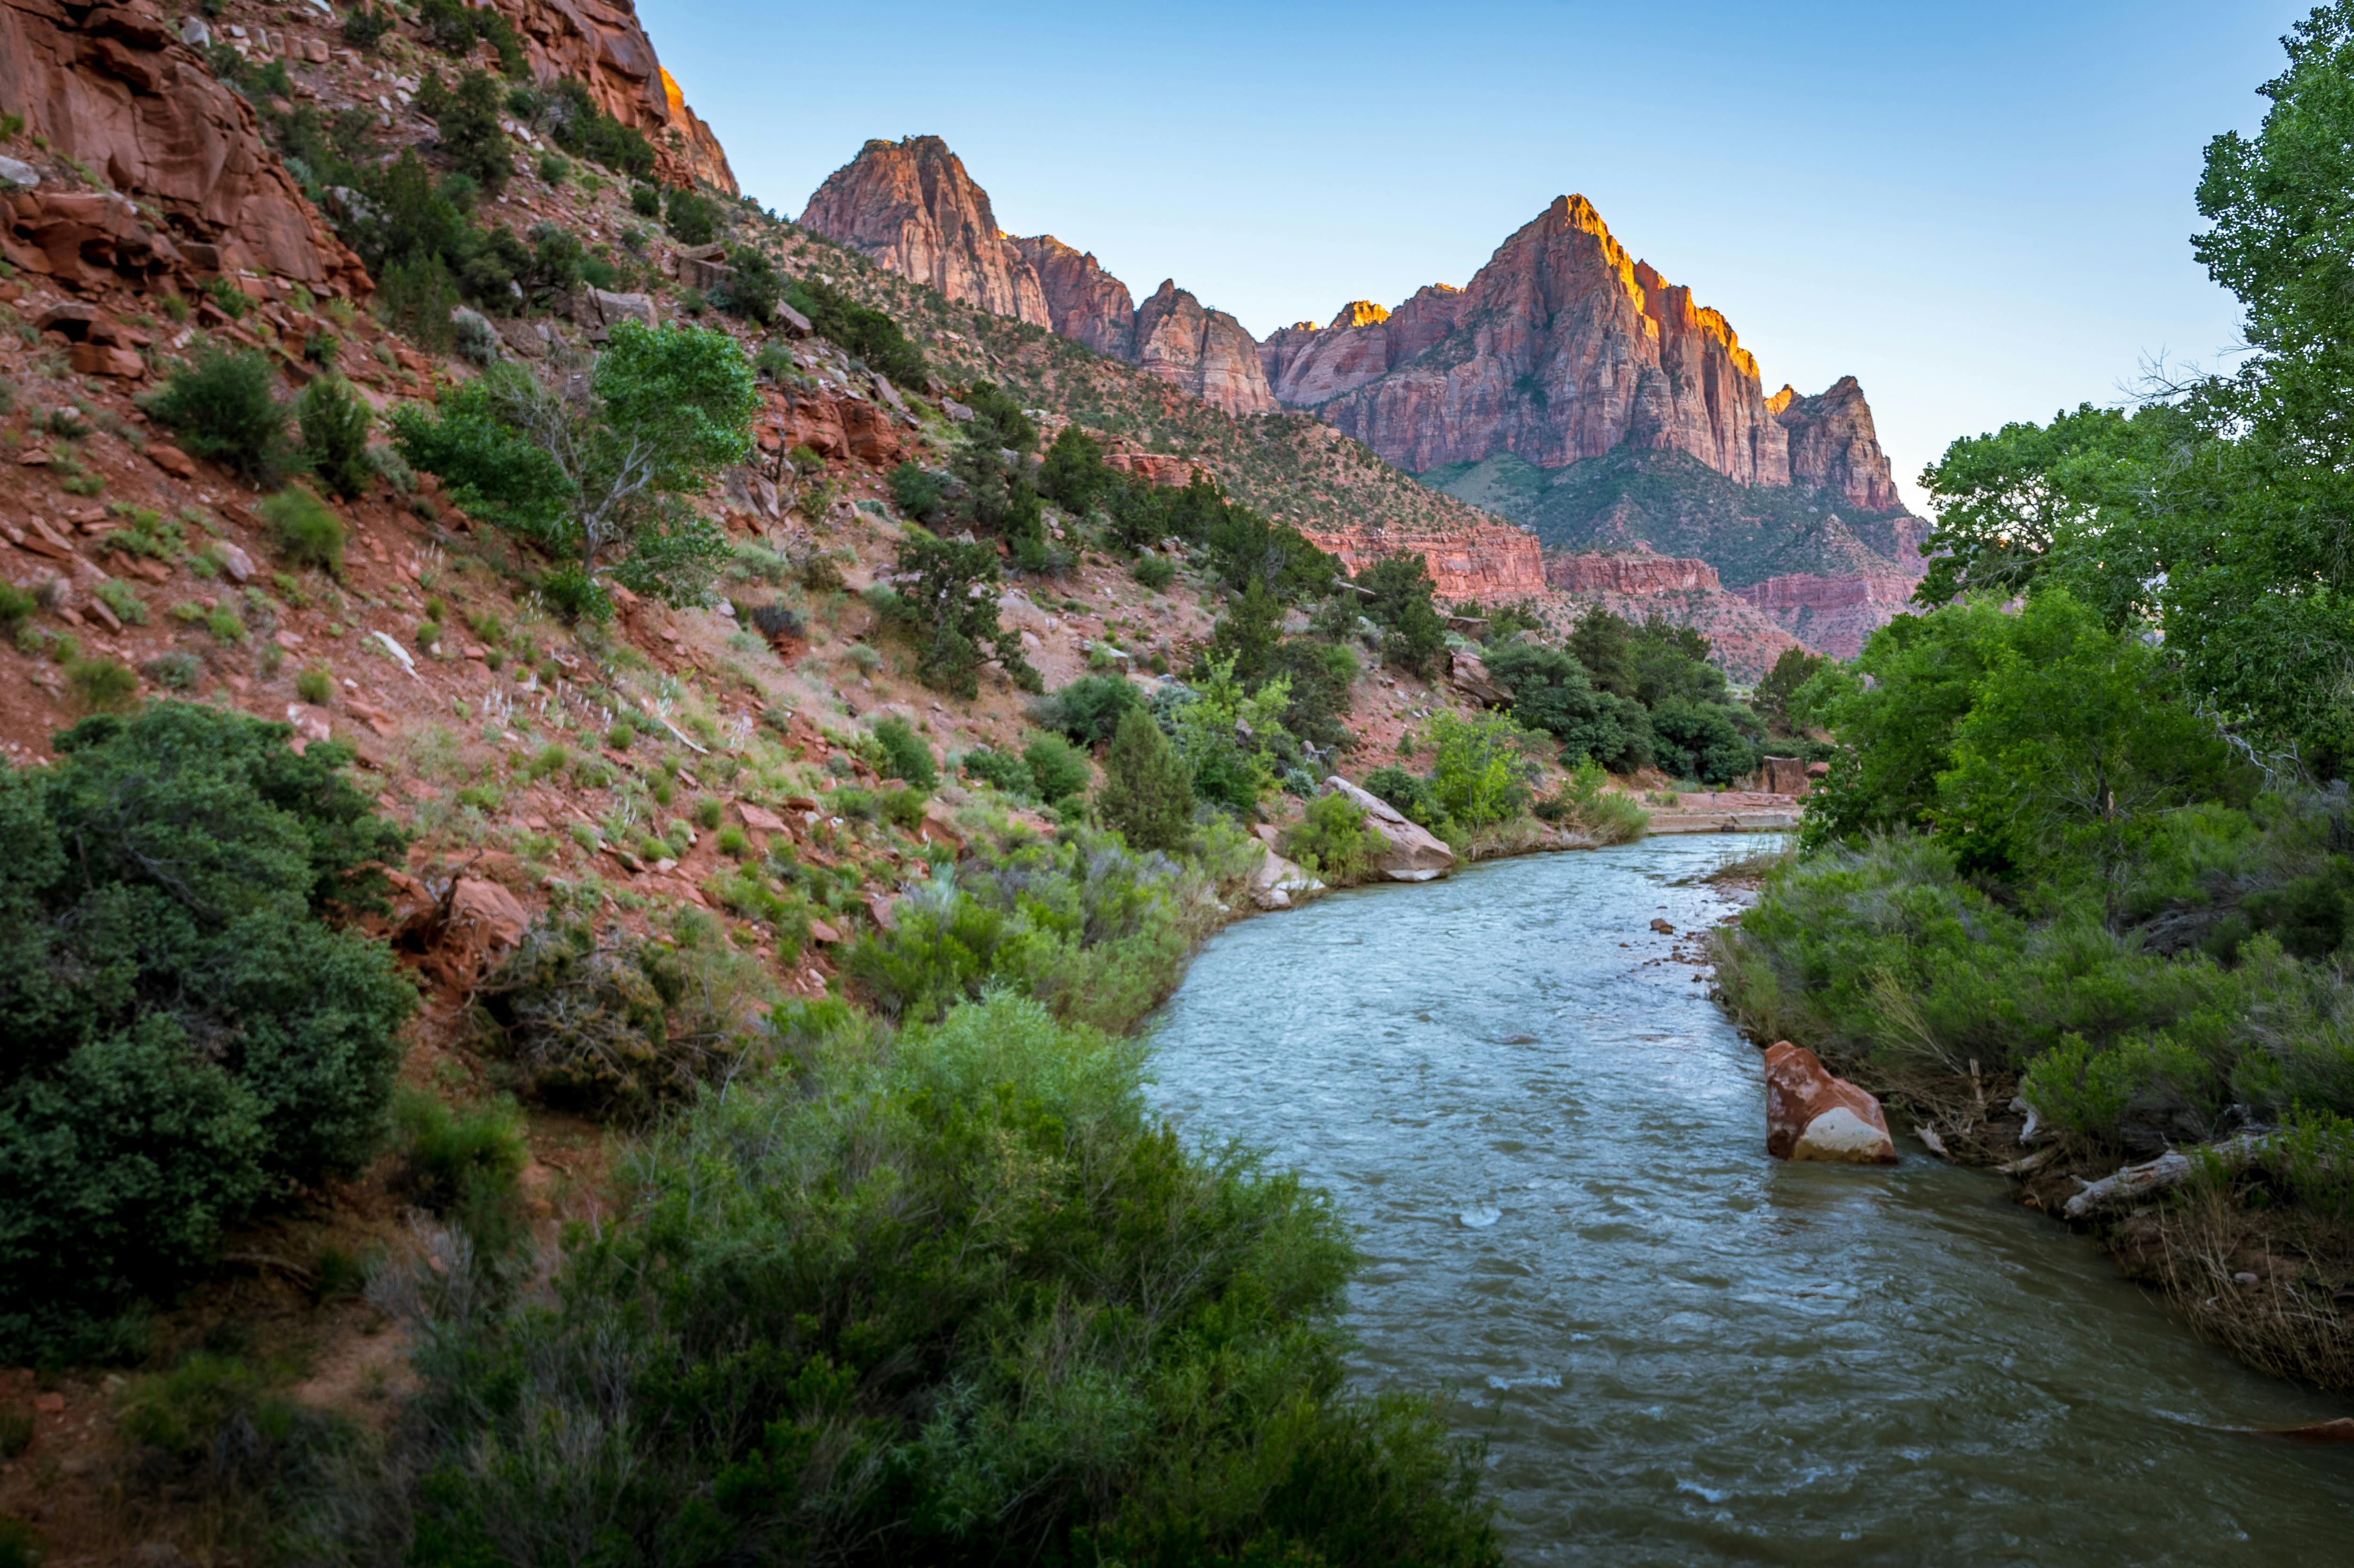 The Virgin River in Zion National Park with mountains in the background